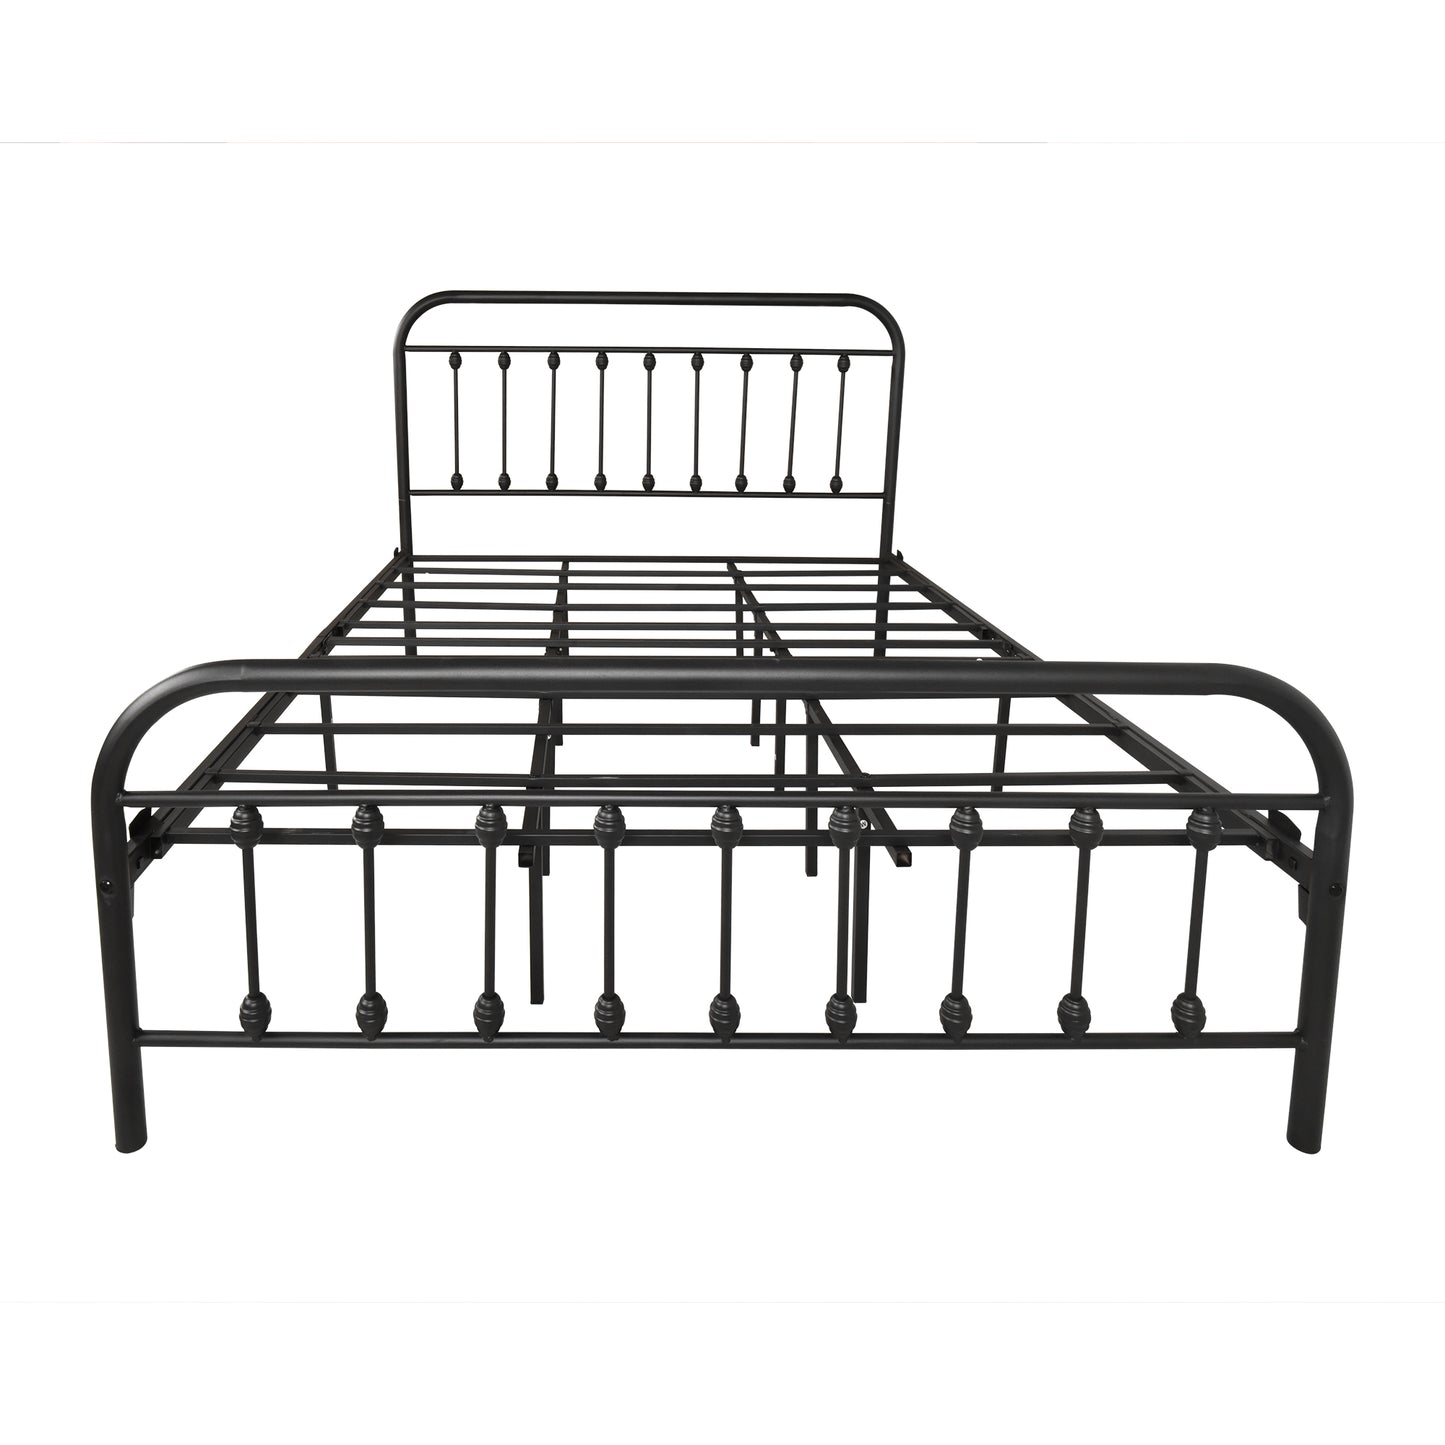 Black Iron Platform Bed Frame Queen Size with Vintage Headboard and Footboard, Metal Queen Bed Frame Mattress Foundation with 600LBS Load Capacity, No Box Spring Required, Space Saving Design